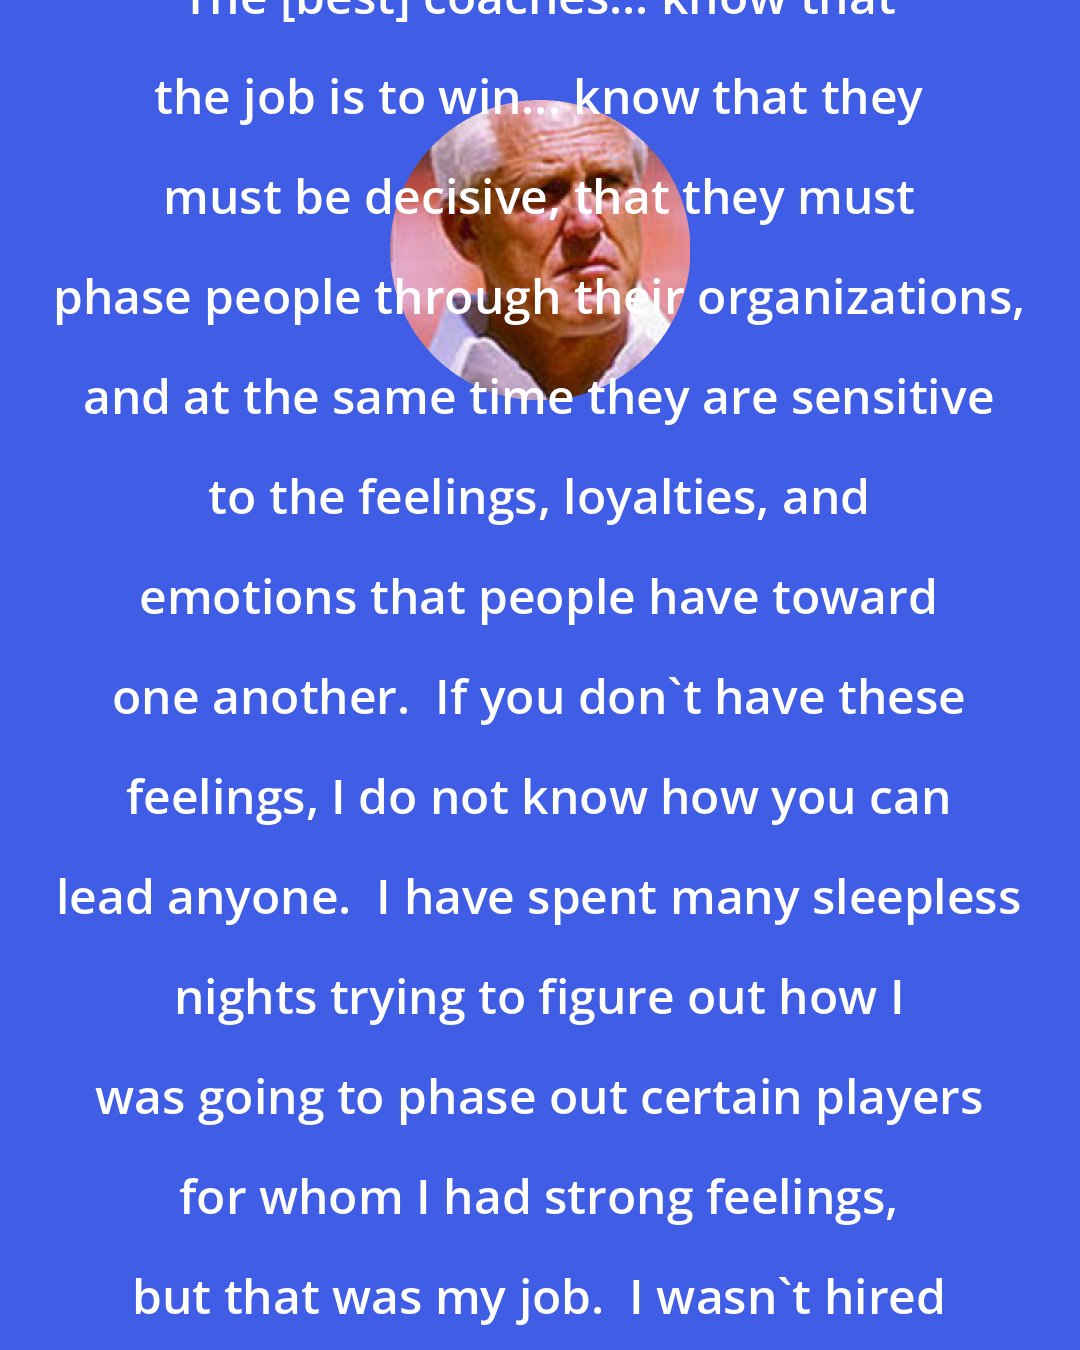 Bill Walsh: The [best] coaches... know that the job is to win... know that they must be decisive, that they must phase people through their organizations, and at the same time they are sensitive to the feelings, loyalties, and emotions that people have toward one another.  If you don't have these feelings, I do not know how you can lead anyone.  I have spent many sleepless nights trying to figure out how I was going to phase out certain players for whom I had strong feelings, but that was my job.  I wasn't hired to do anything but win.